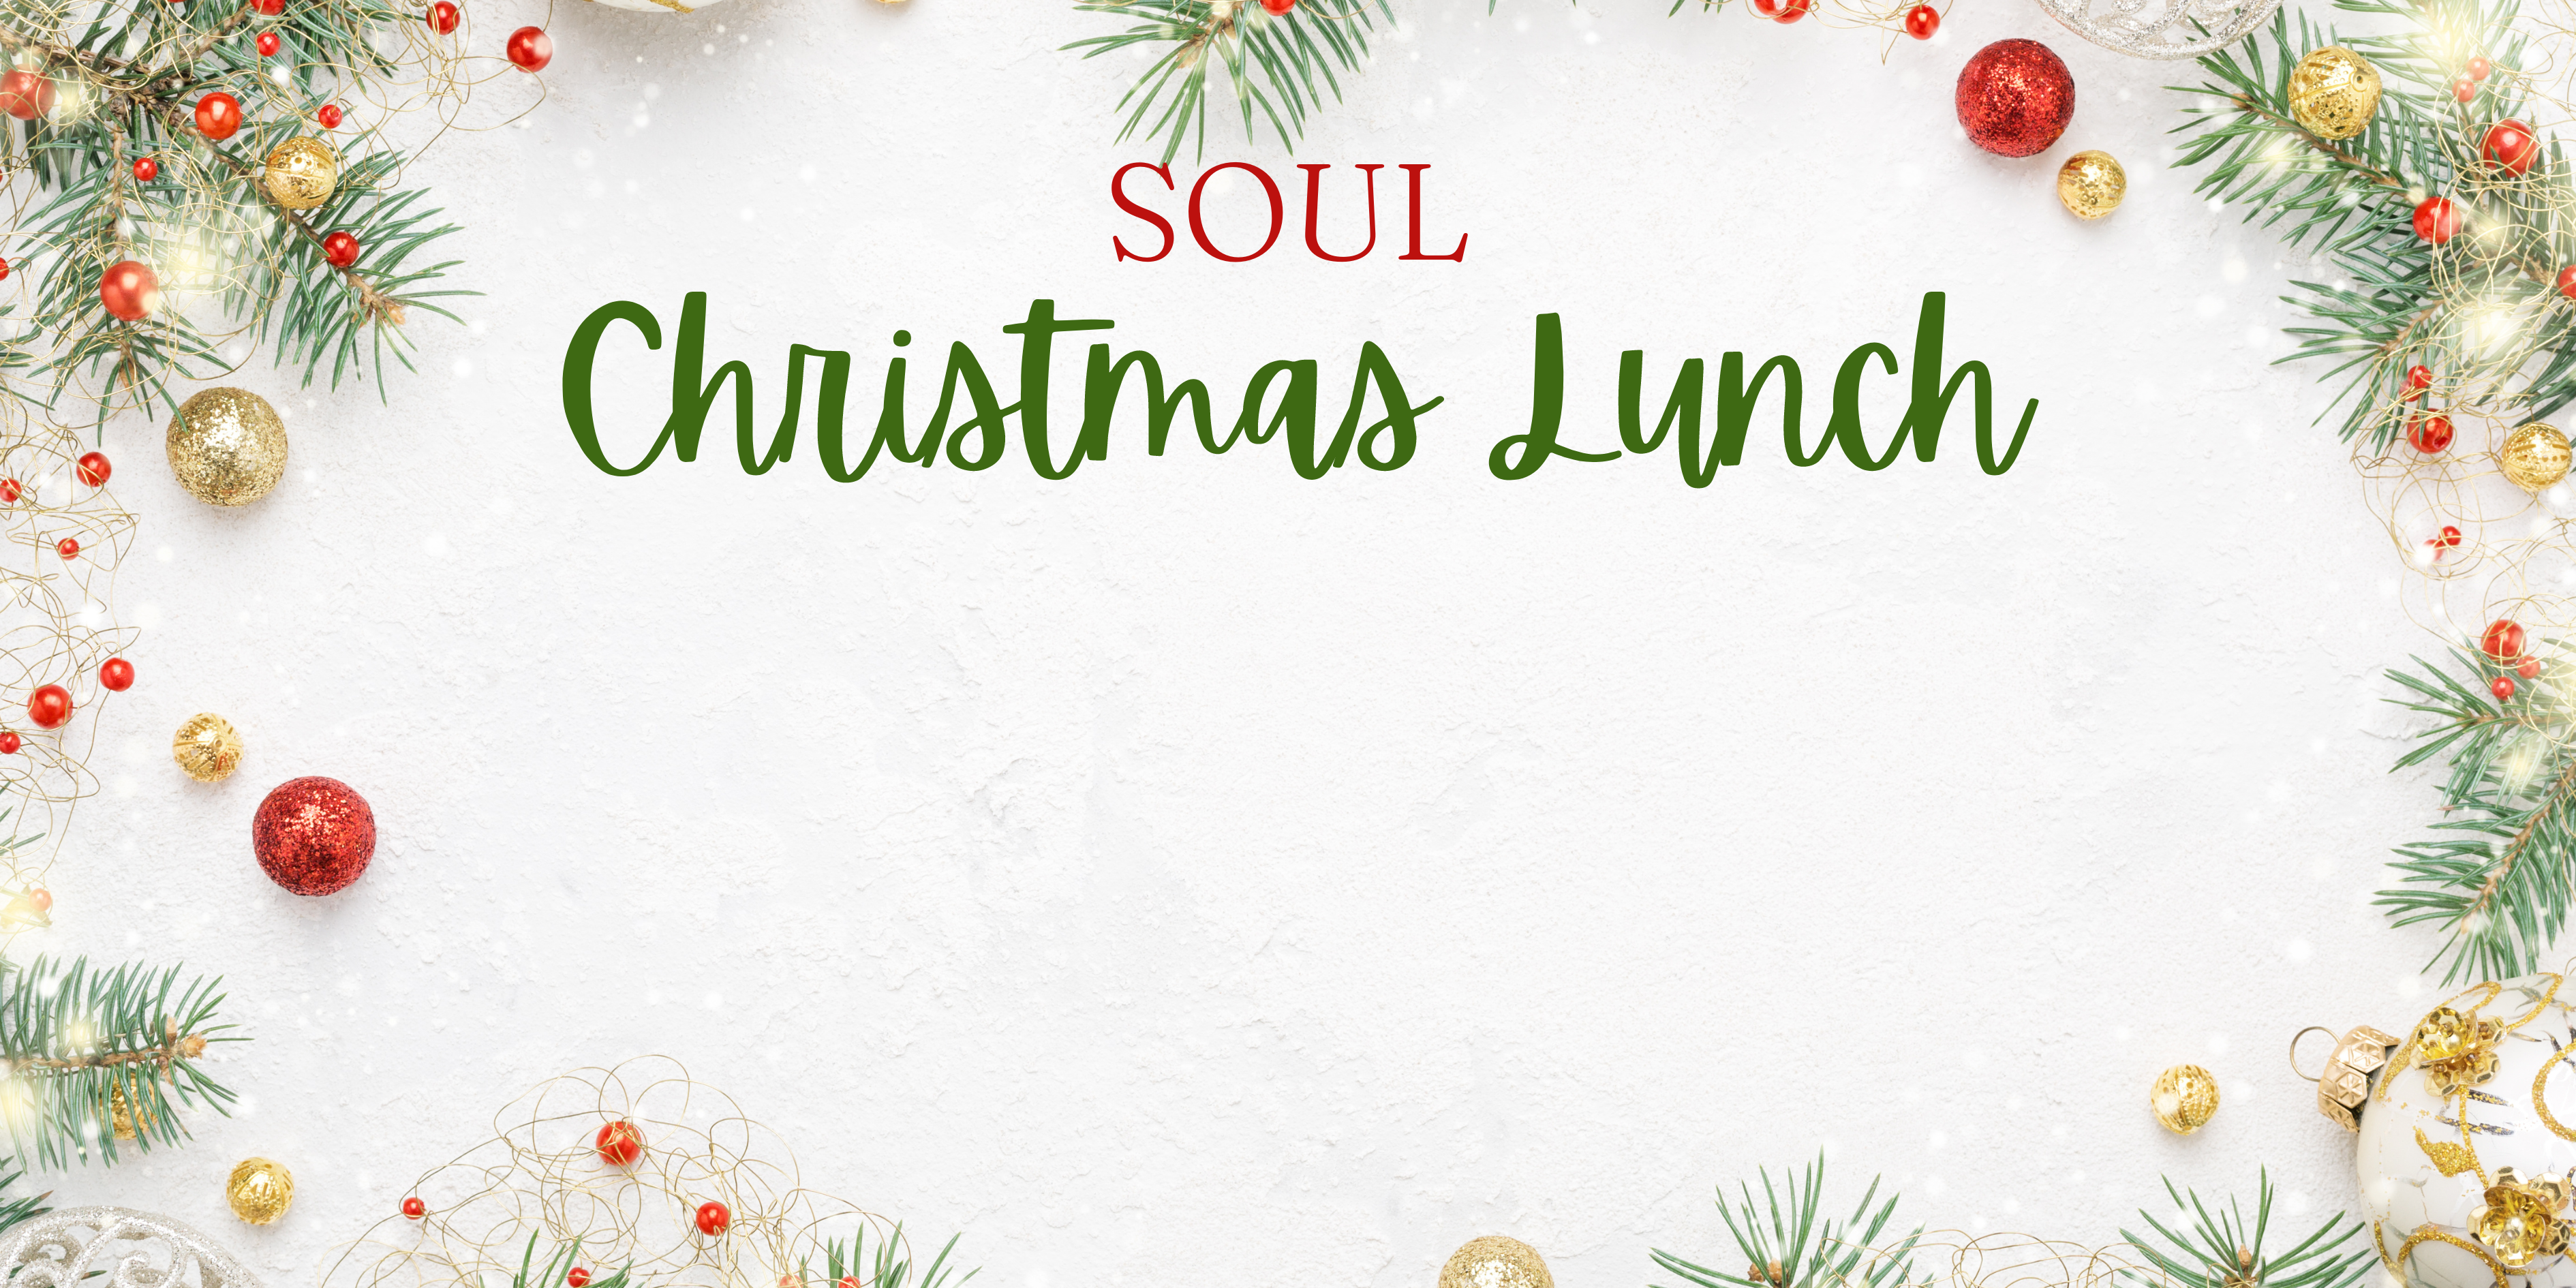 SOUL Christmas Lunch